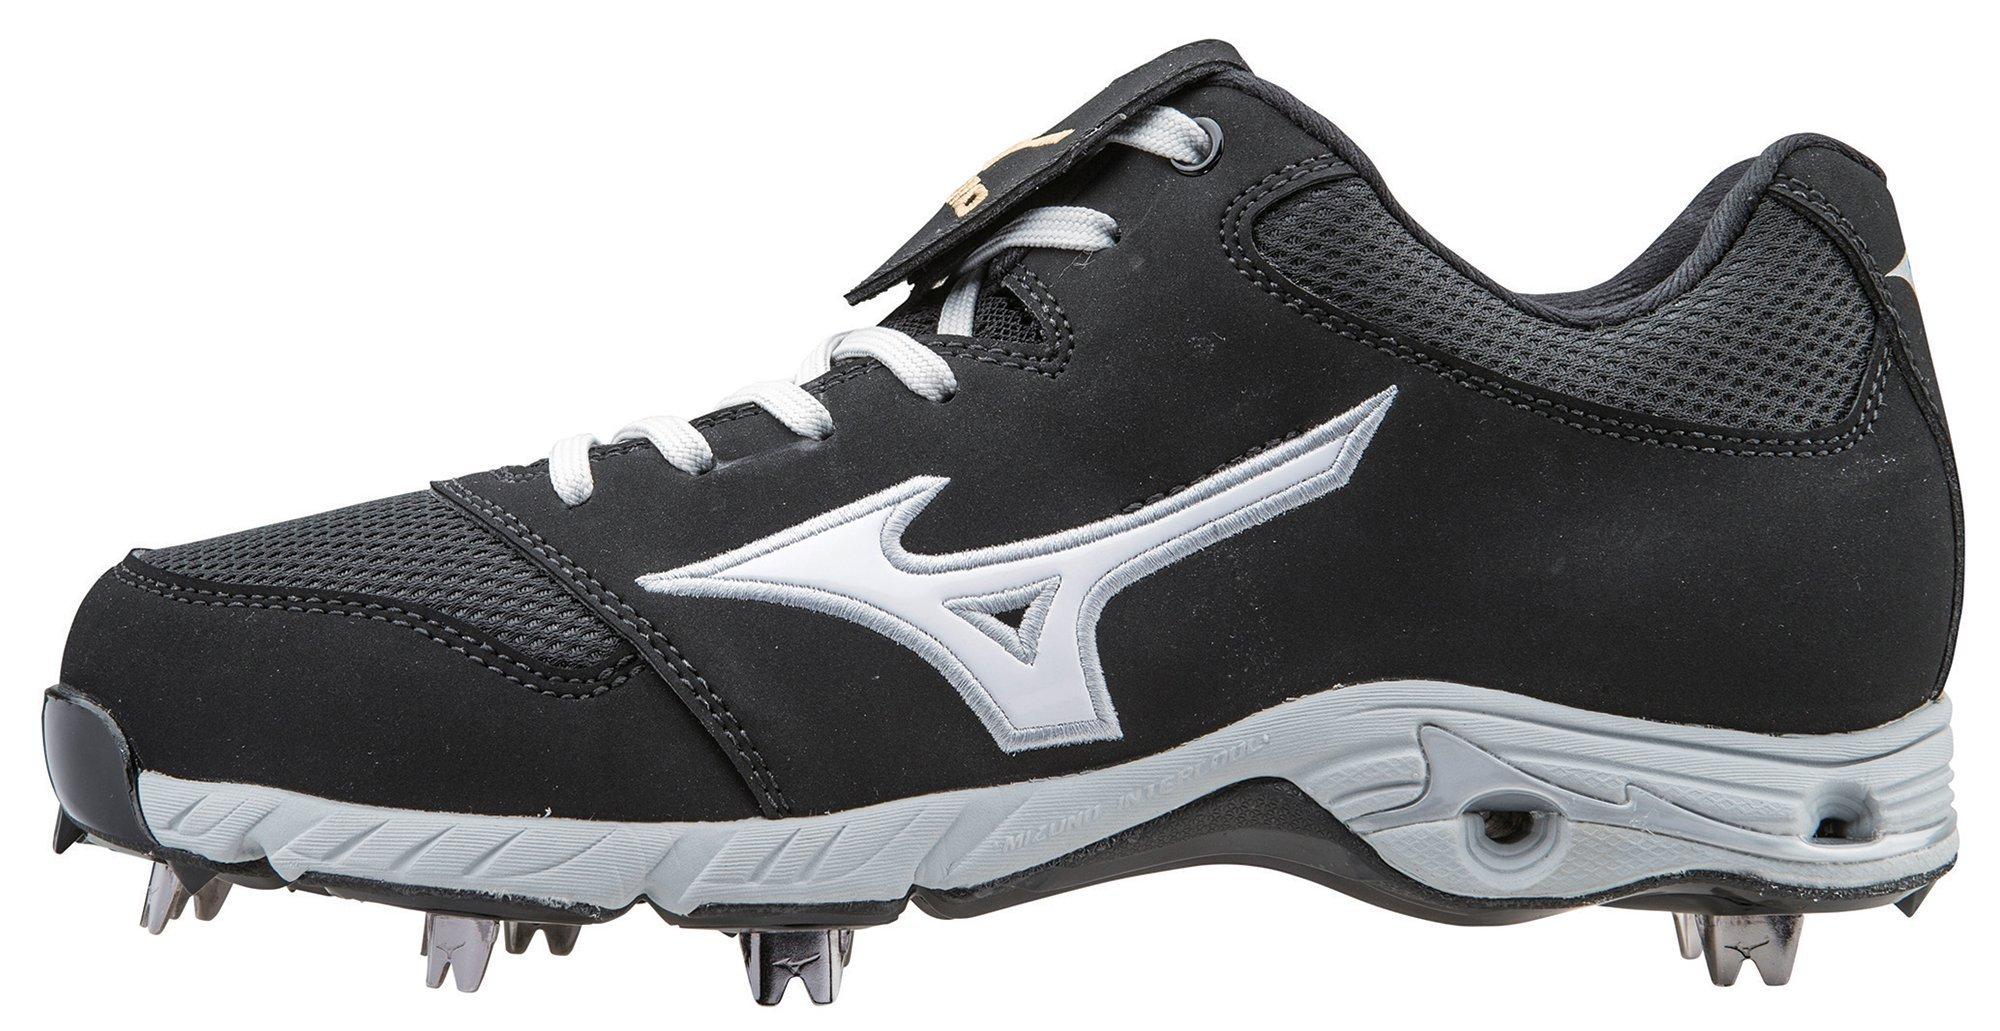 mizuno volleyball shoes wave lightning z3